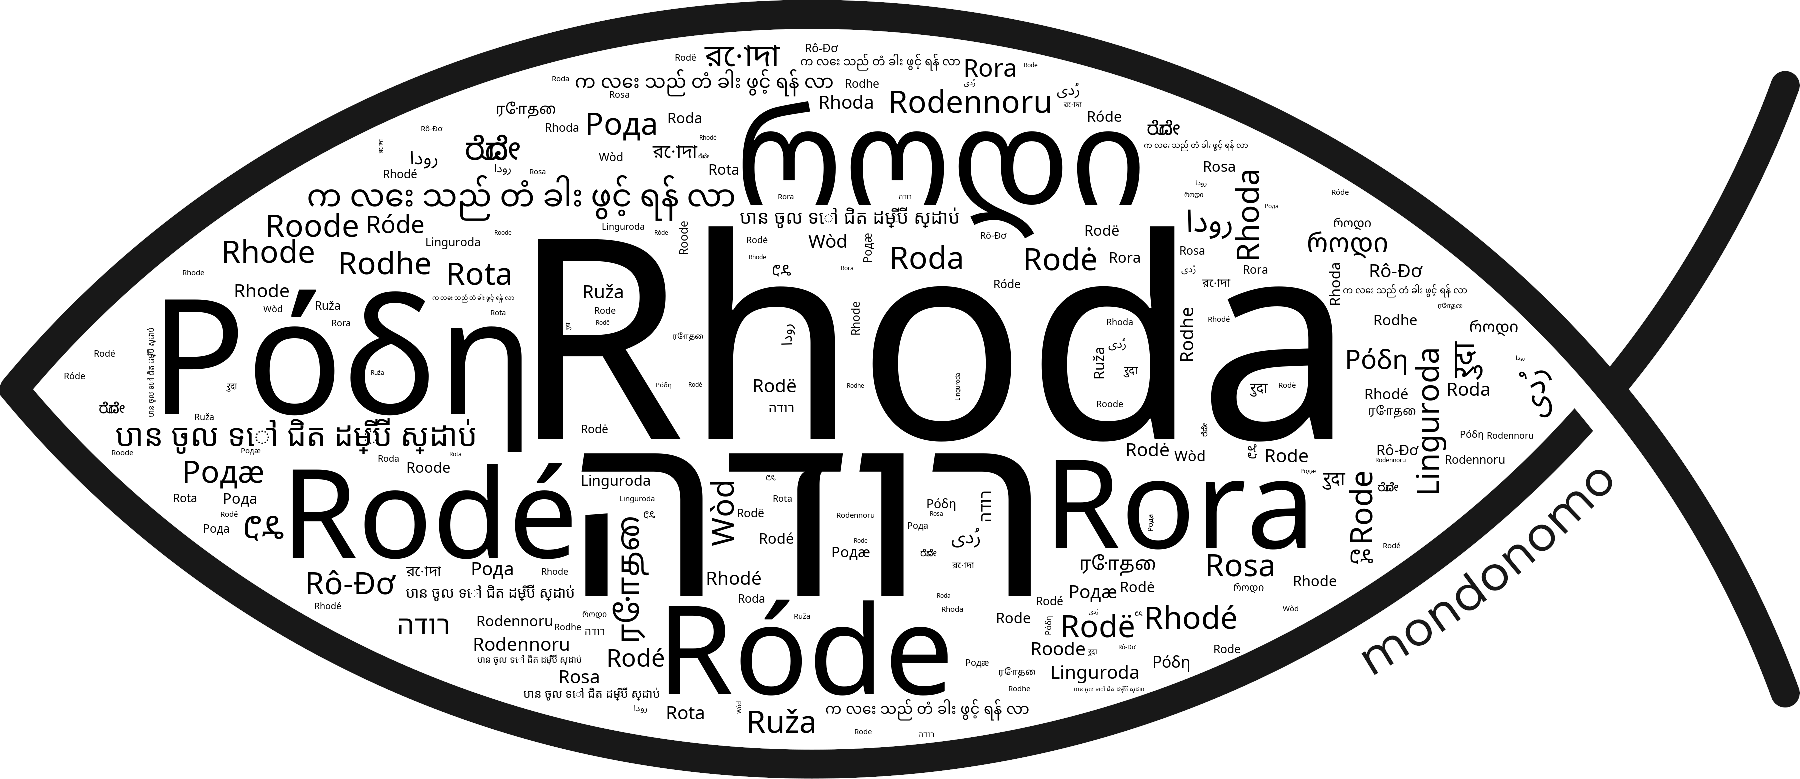 Name Rhoda in the world's Bibles